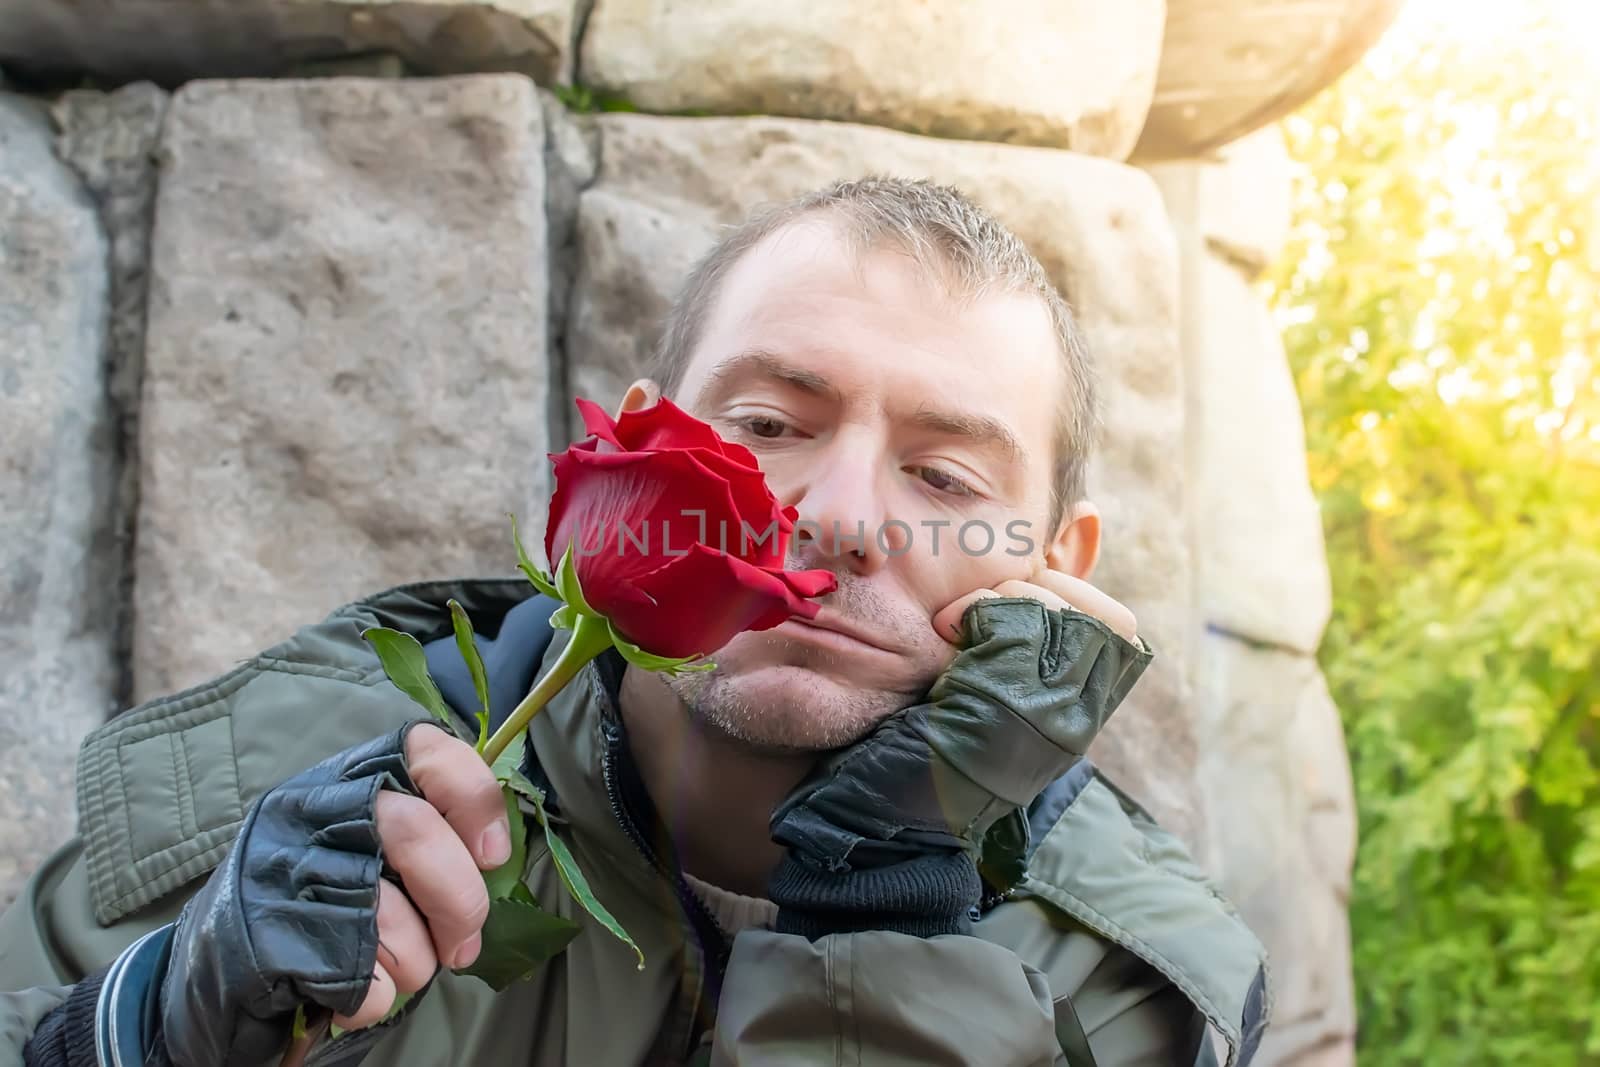 a guy in a jacket and leather gloves sits, sad and sniffs a red rose bud in his hand